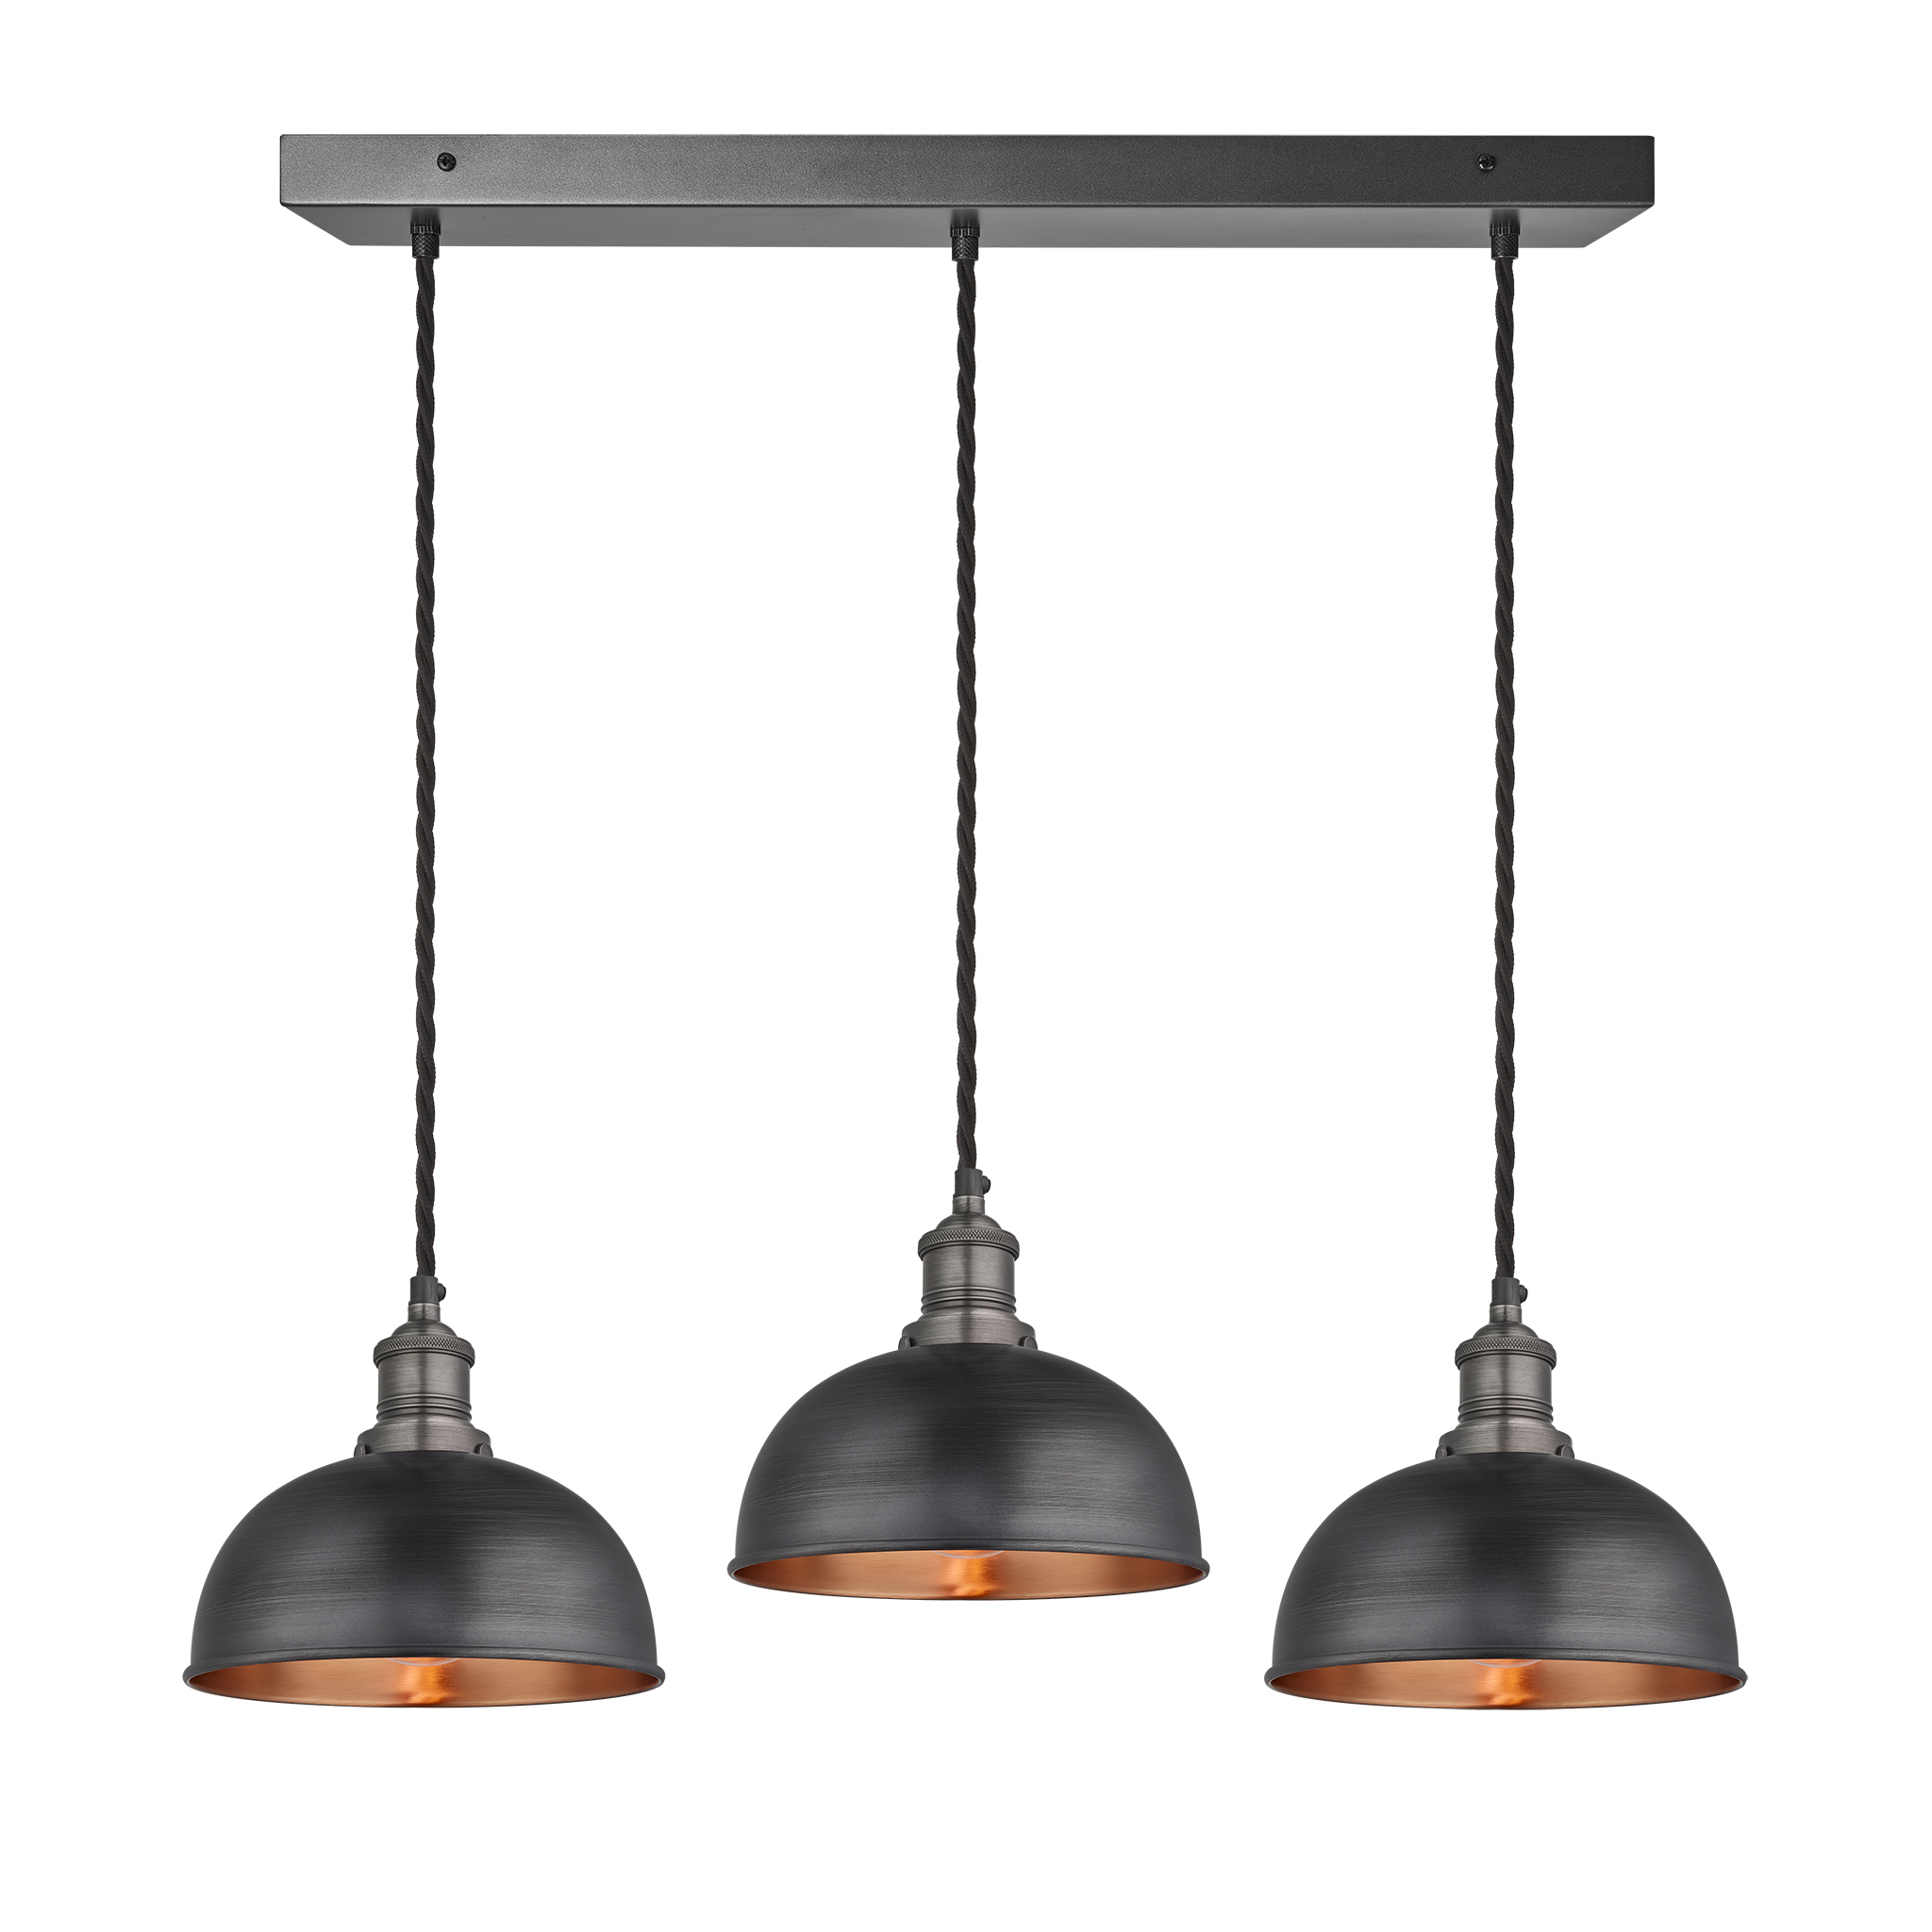 8-Inch_Pendant_Pewter_Copper_Industville_Lighting_Dome_PewterHolder_Brooklyn_BR-D8-3WCL-CP-PH